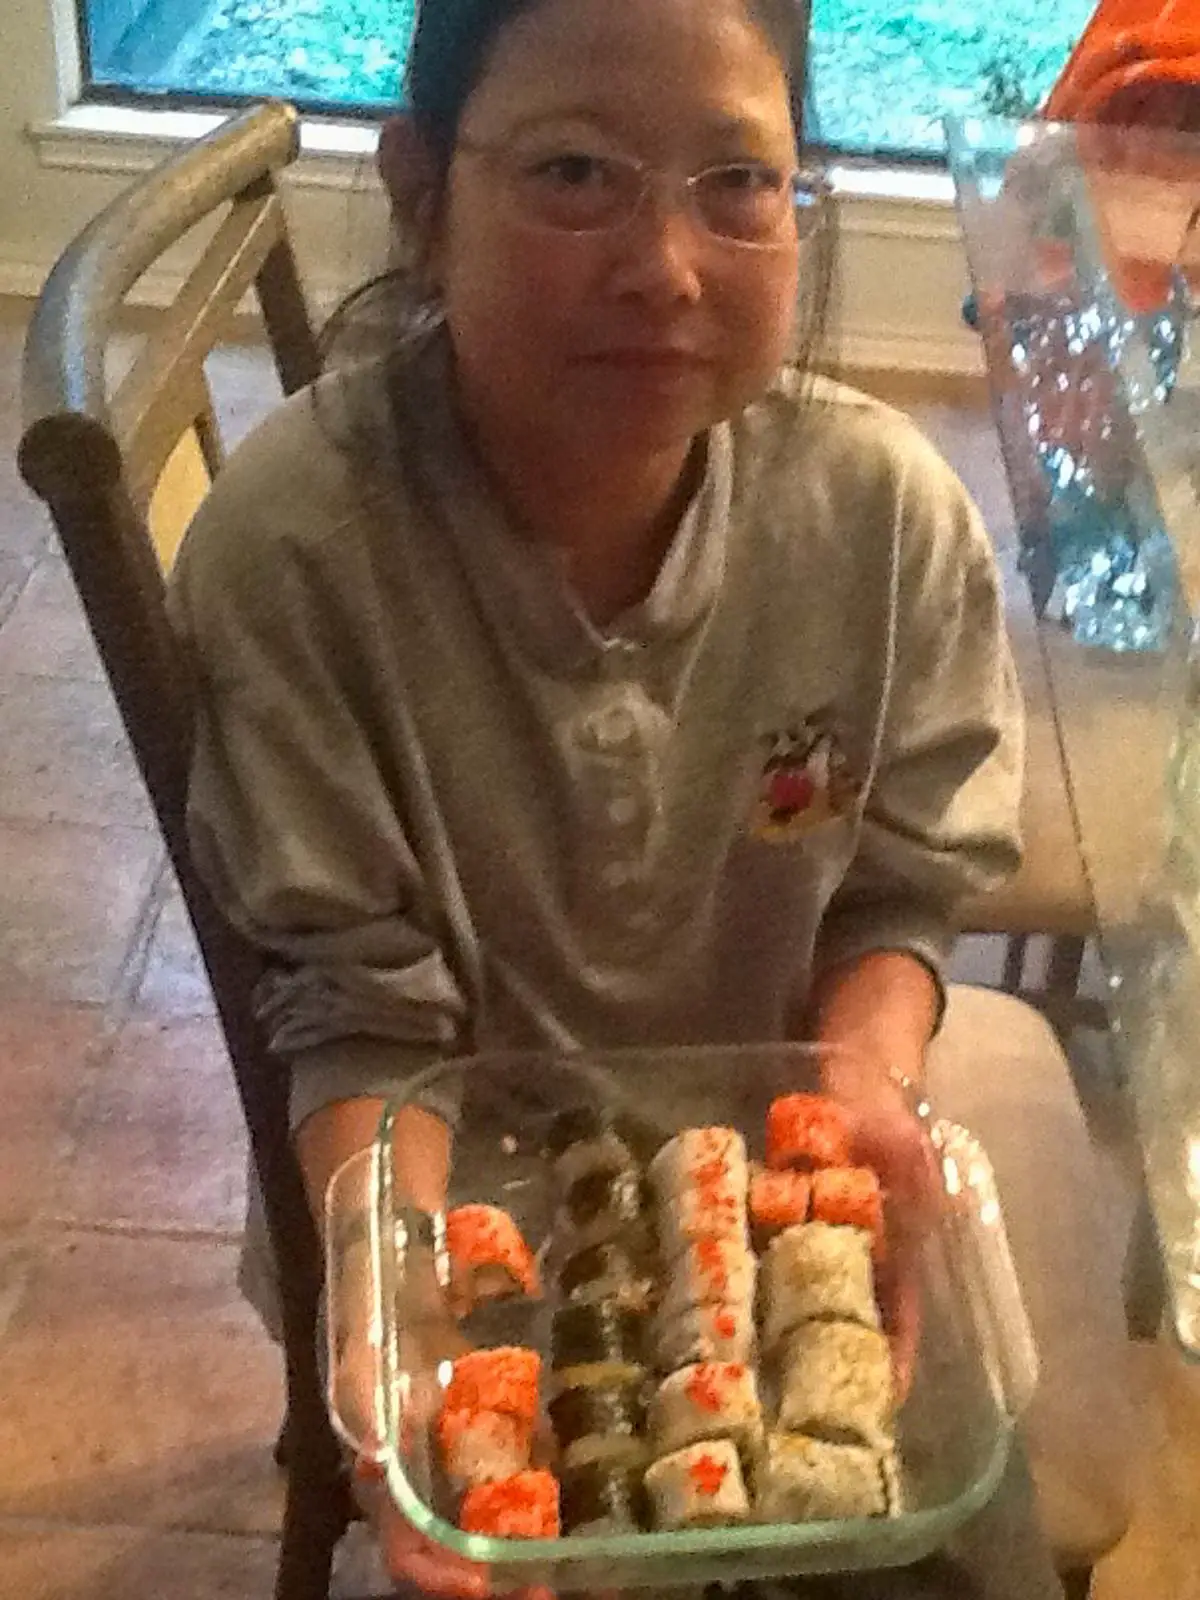 My sister Tami holding a glass dish with different colored and types of sushi